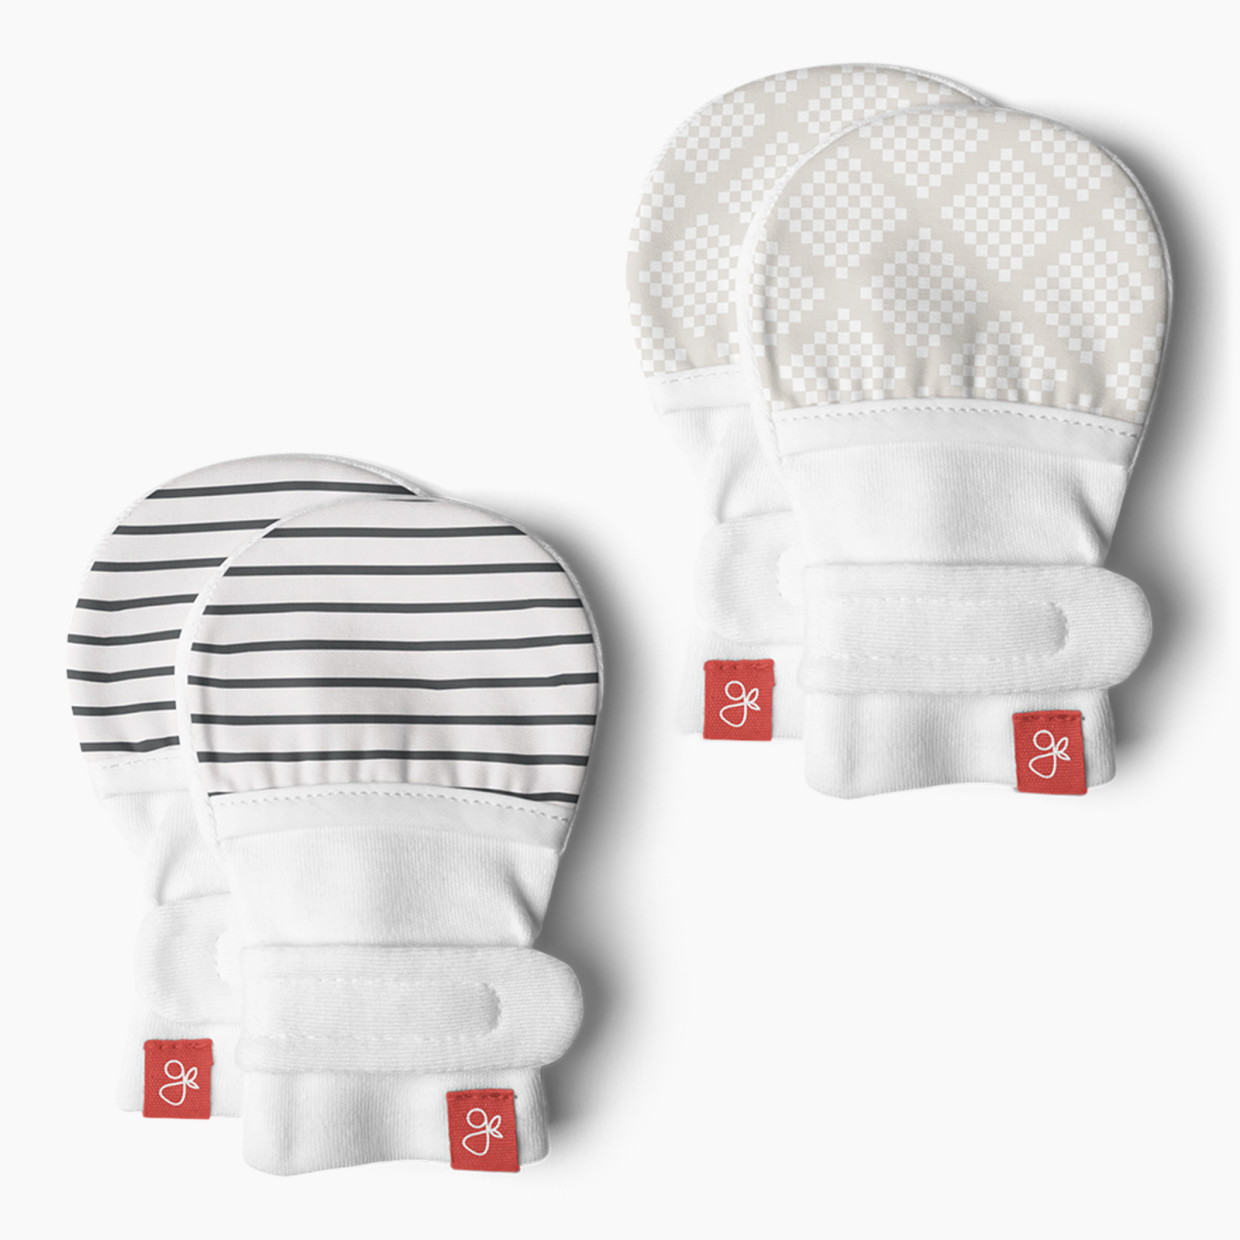 Goumi Kids Stay on Baby Mitts (2 Pack) - Stripe Gray + Diamond Dots Cream, 0-3 Months.